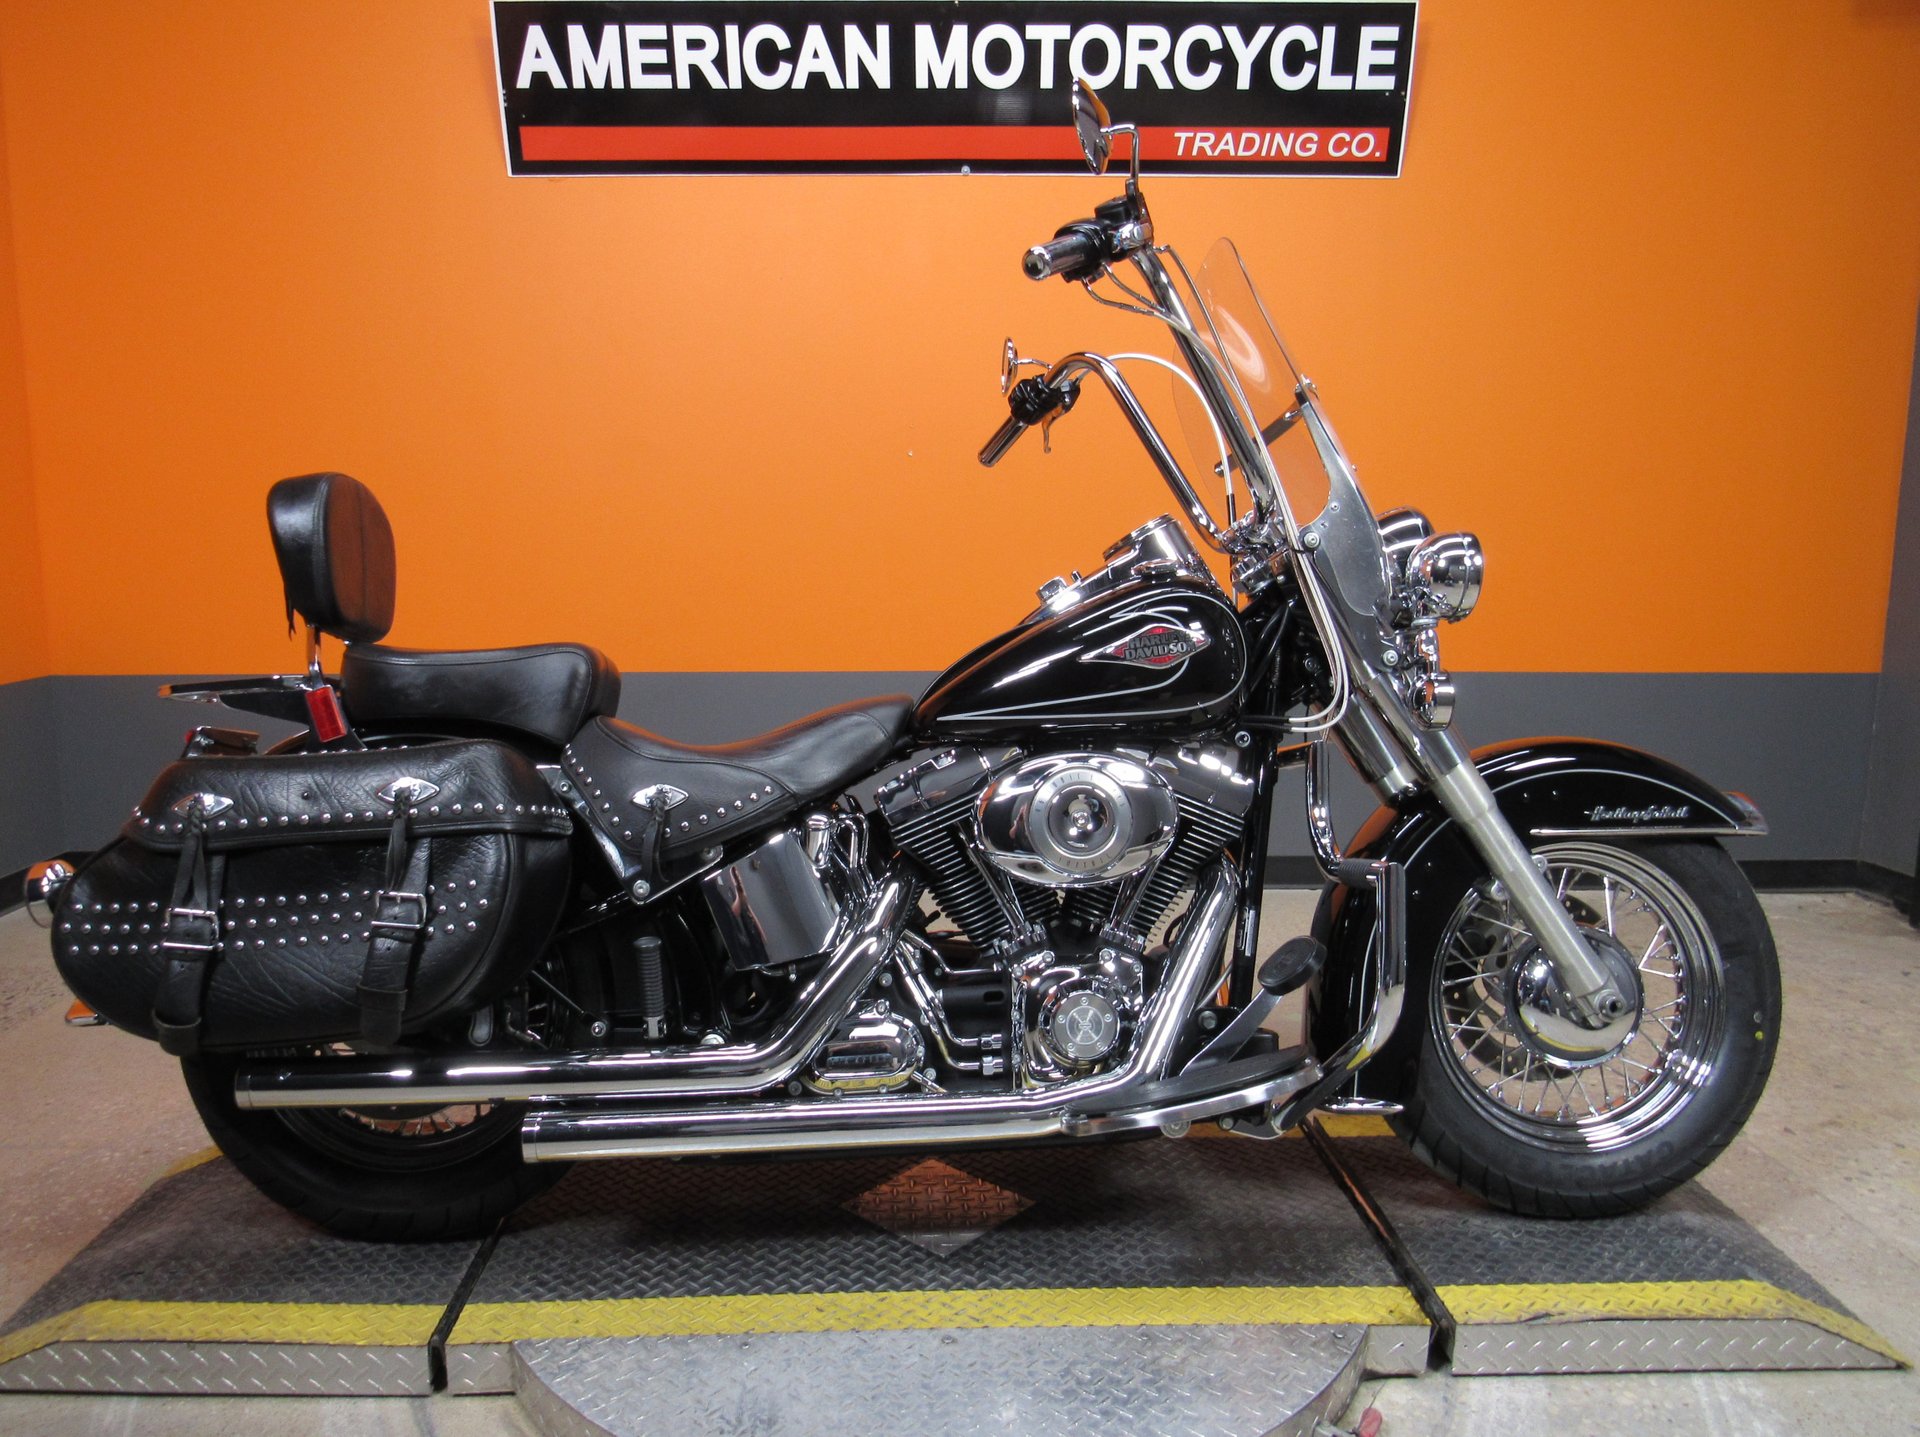 2009 Harley Davidson Softail Heritage Classic American Motorcycle Trading Company Used Harley Davidson Motorcycles